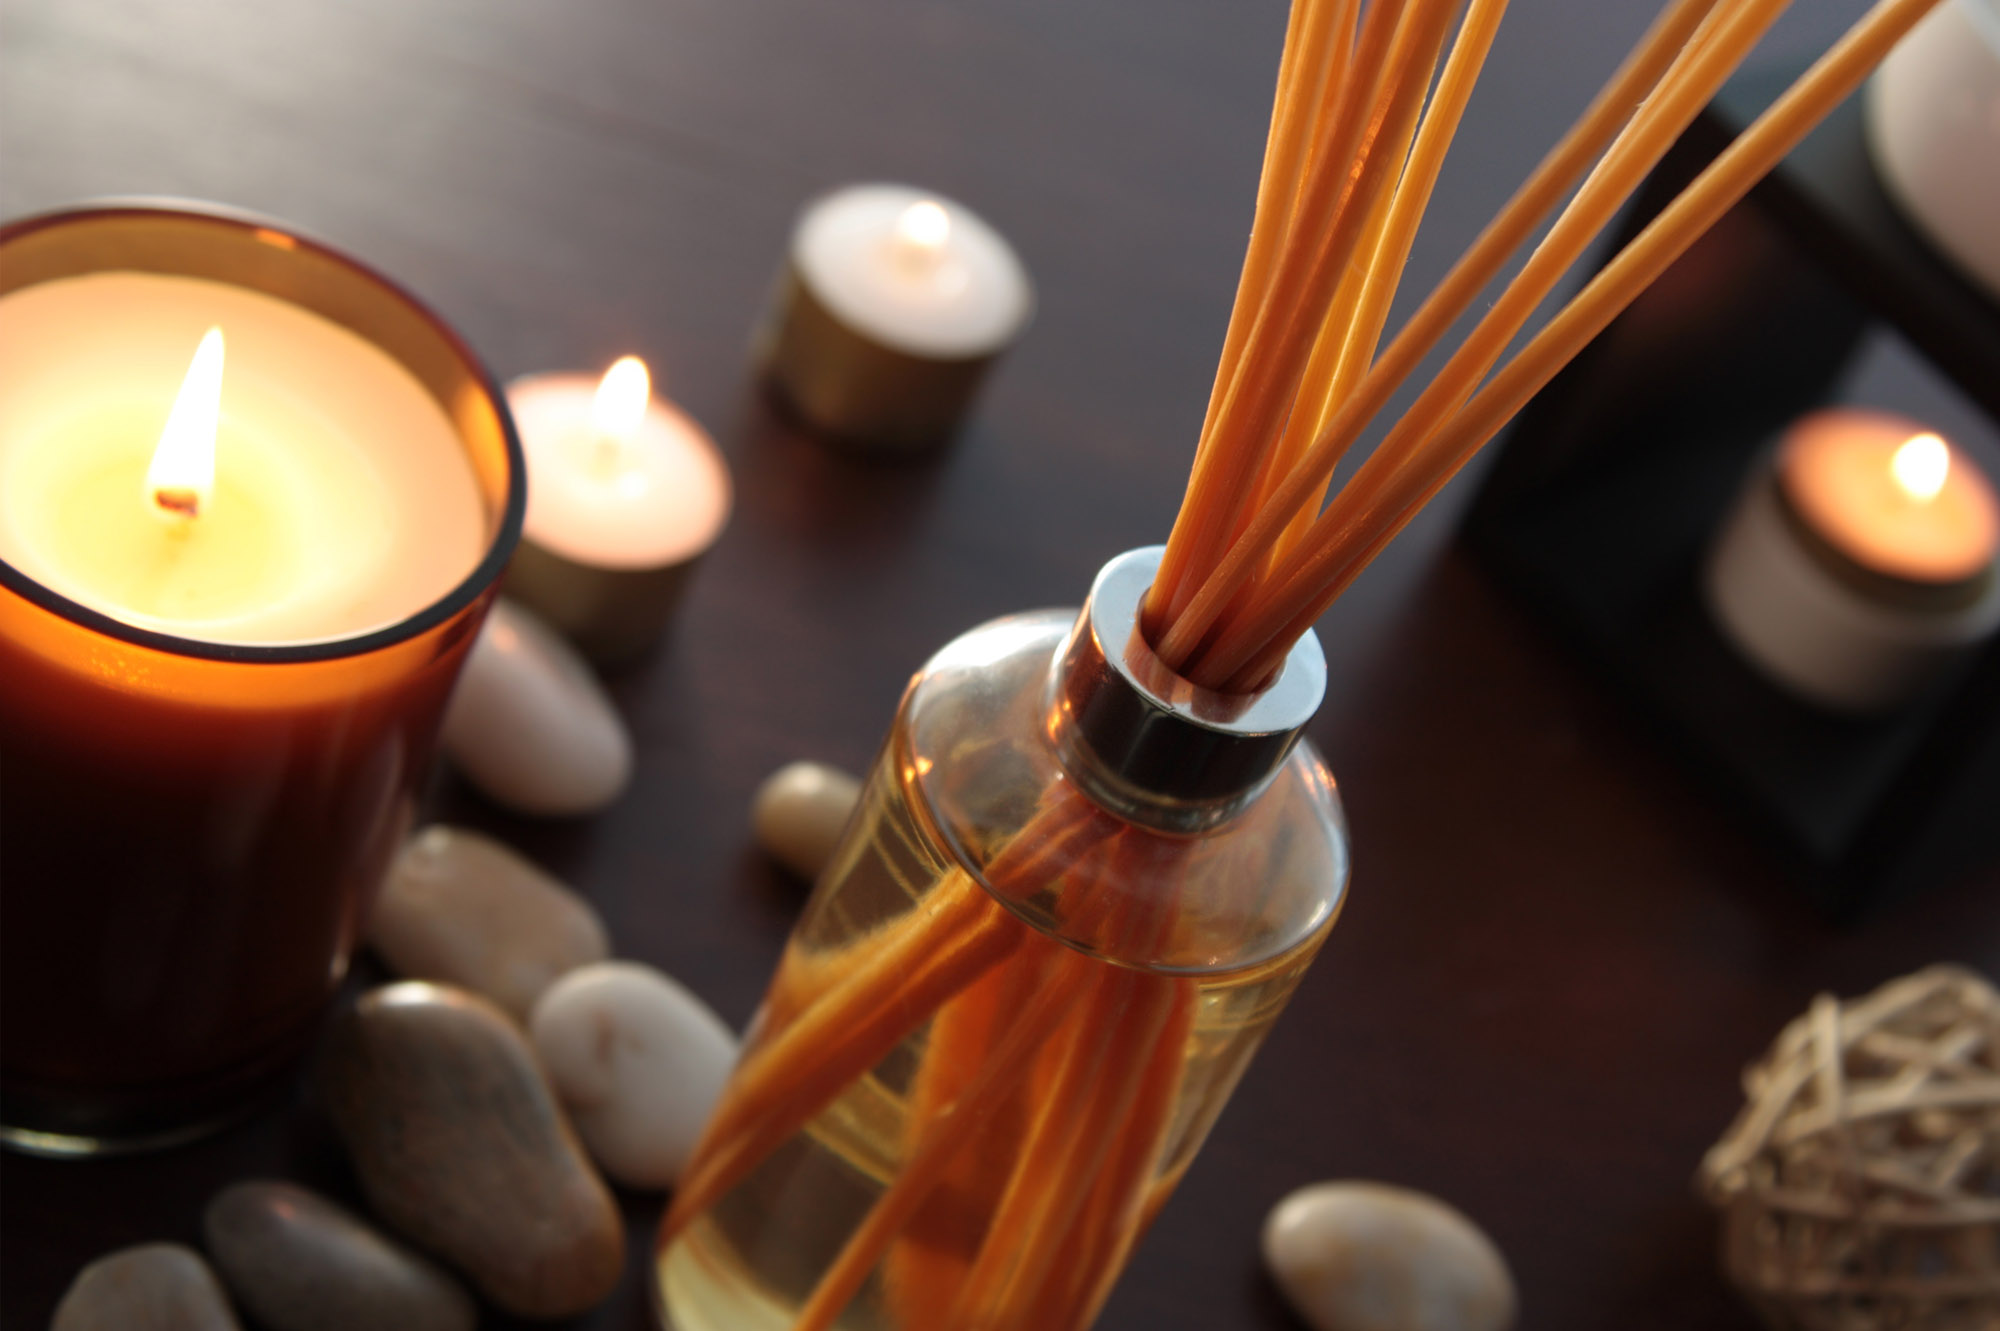 Close up of a bottle of fragrance diffuser with reeds. Tea light candles and an oil burner in the background. Shallow depth of field.